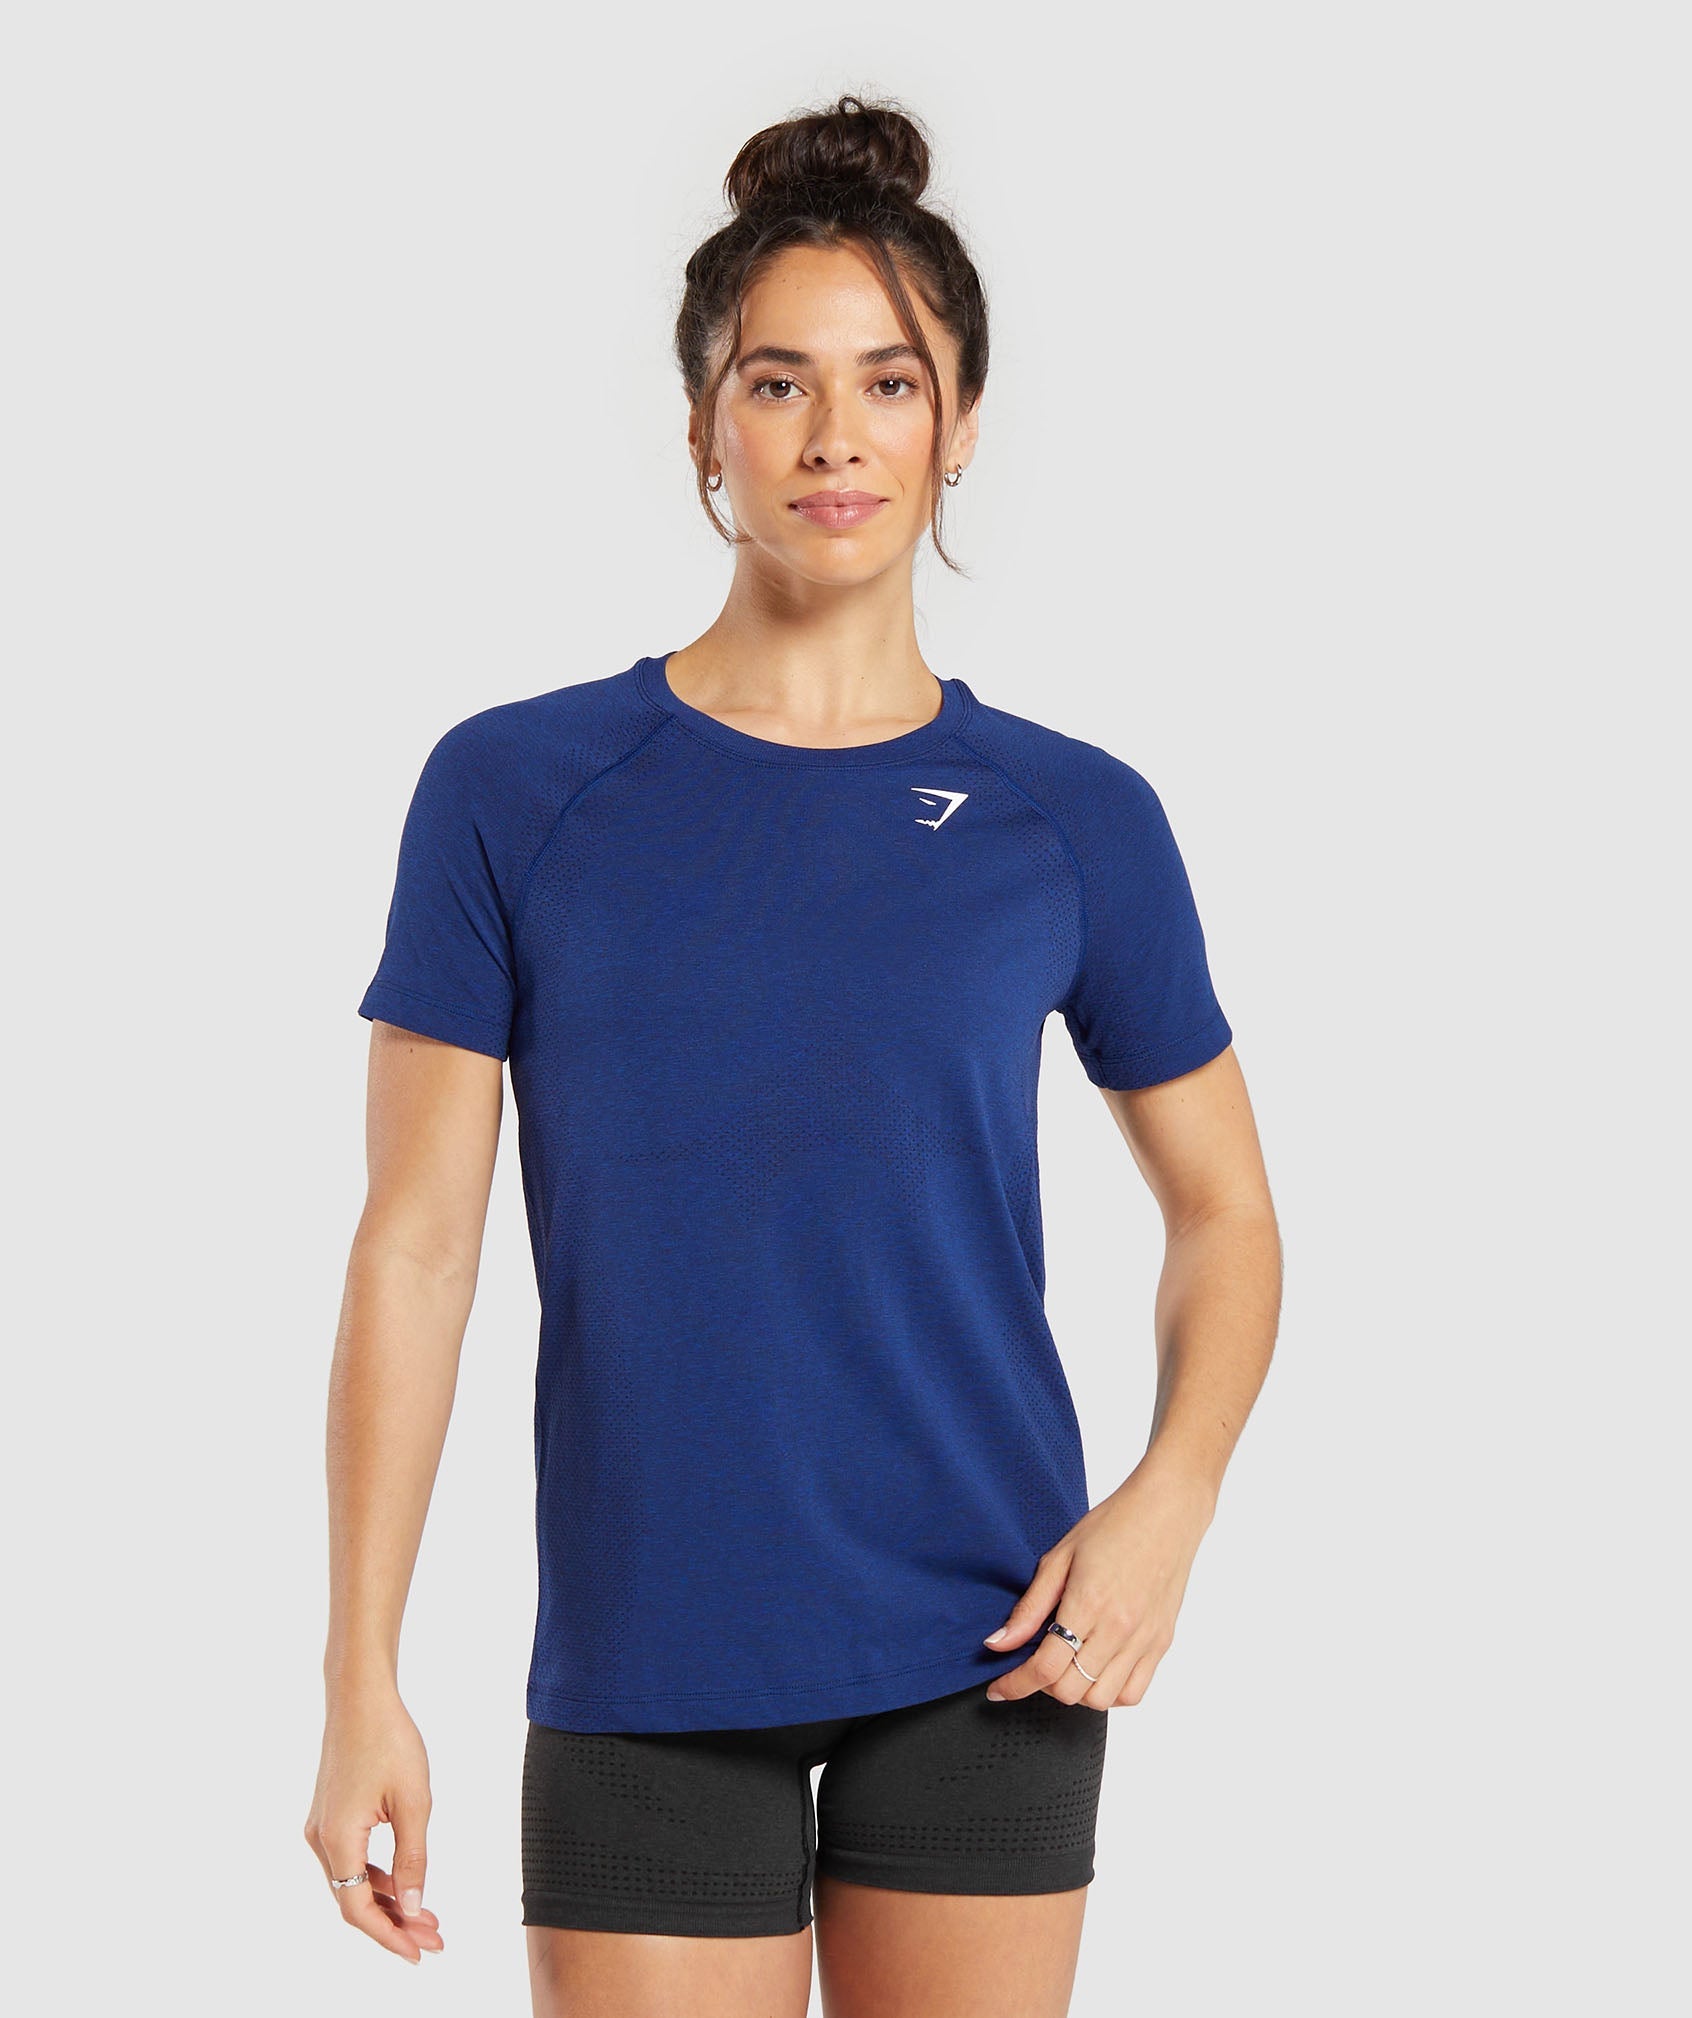 Vital Seamless 2.0 Light T-Shirt in {{variantColor} is out of stock